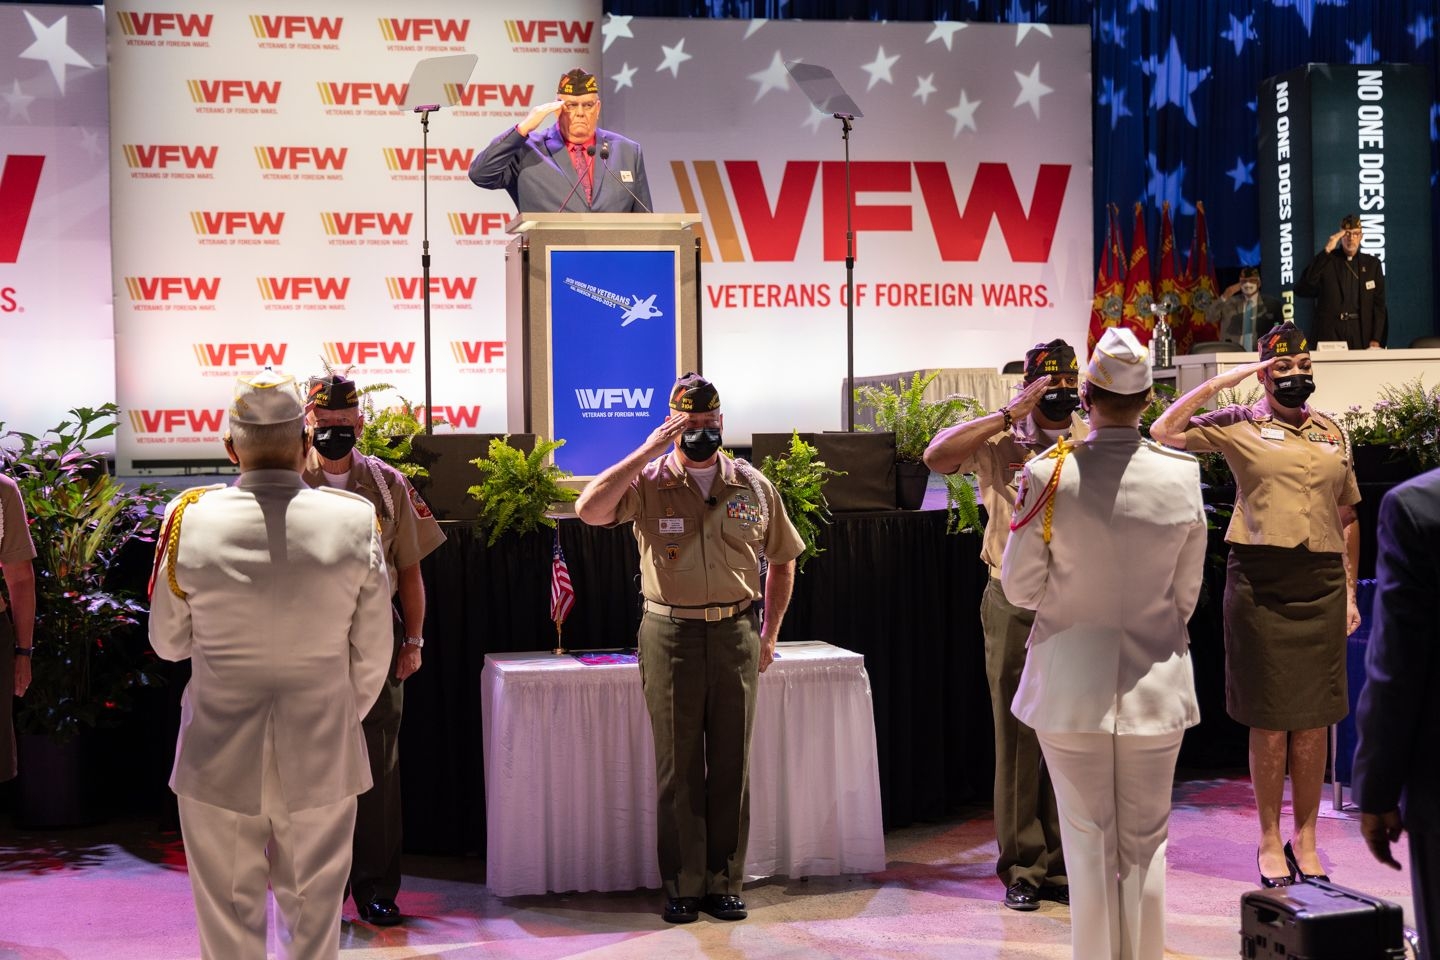 Veterans of Foreign Wars National Convention 30 July 3 August 2021 Kansas City Missouri Presenting colors